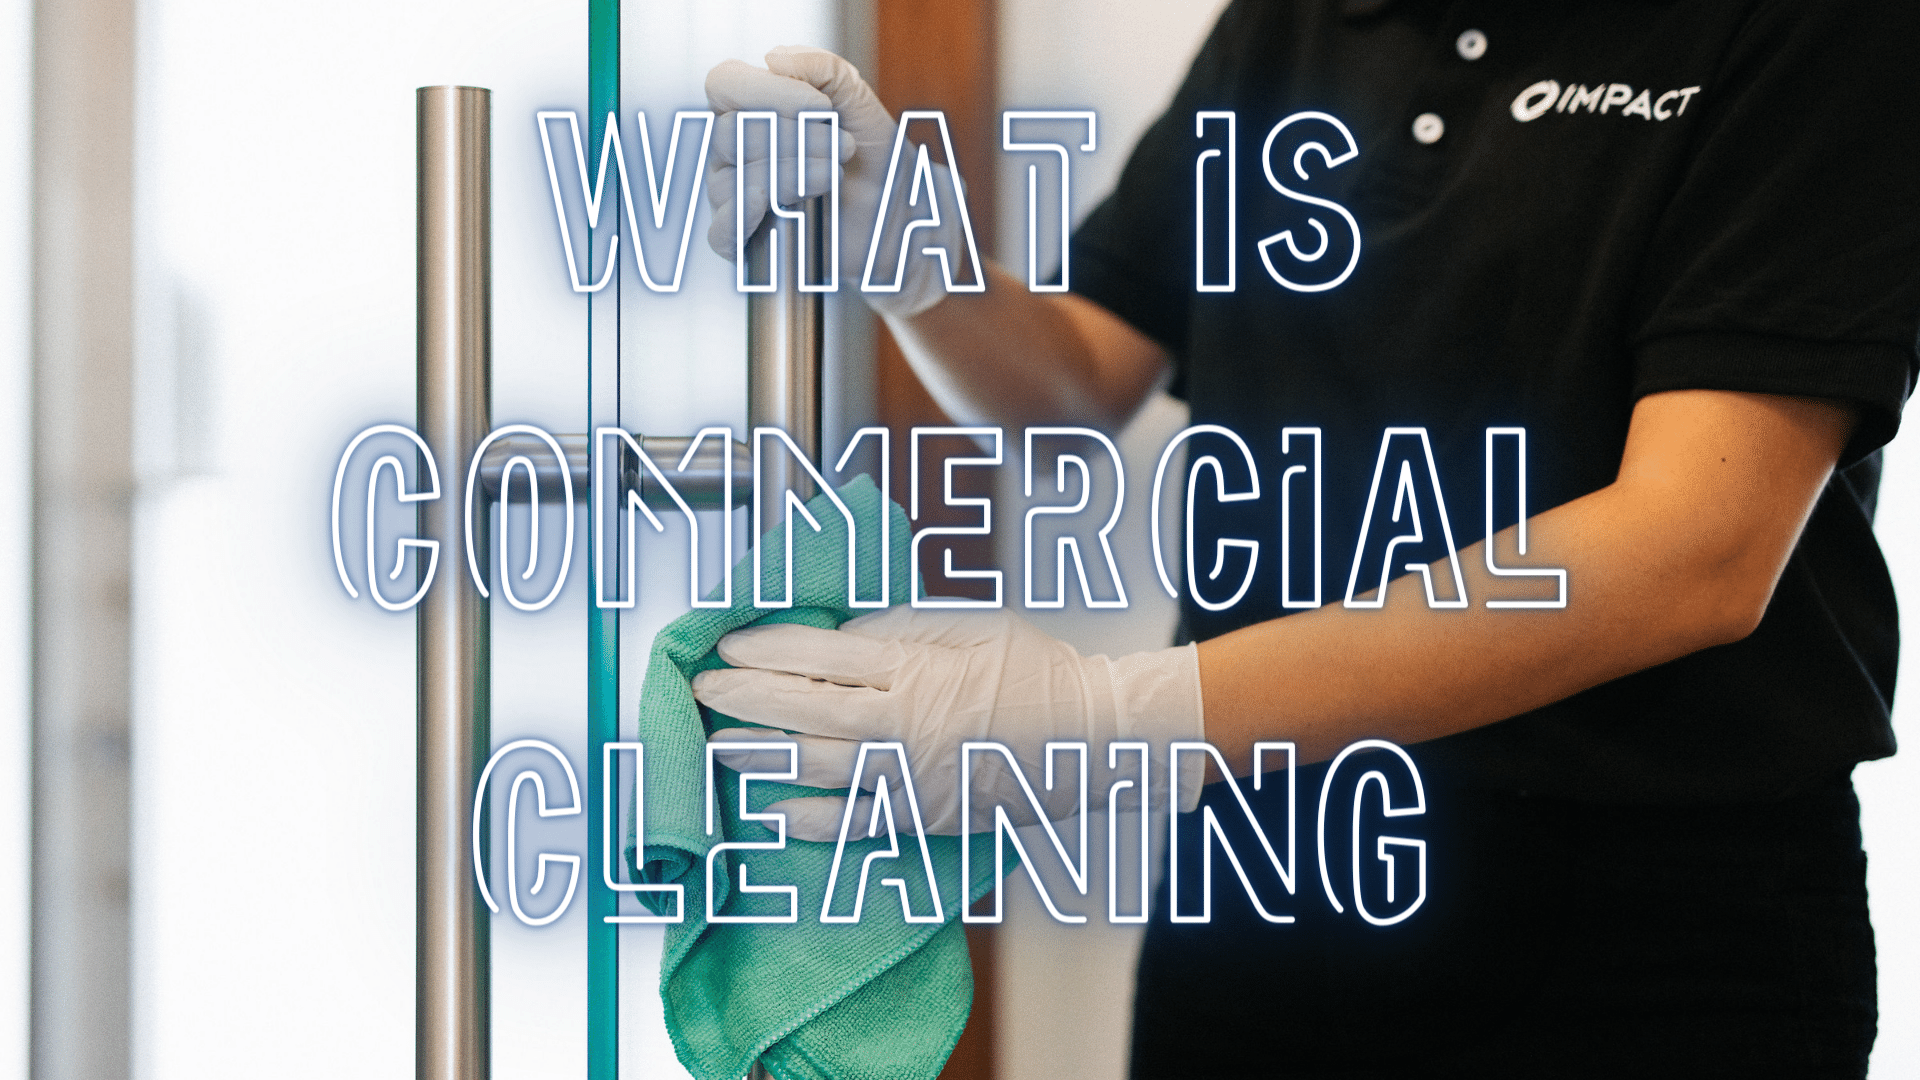 https://impact.ca/hubfs/Website%20Files/Website%20-%20Blog%20Content/What%20is%20commercial%20cleaning.png